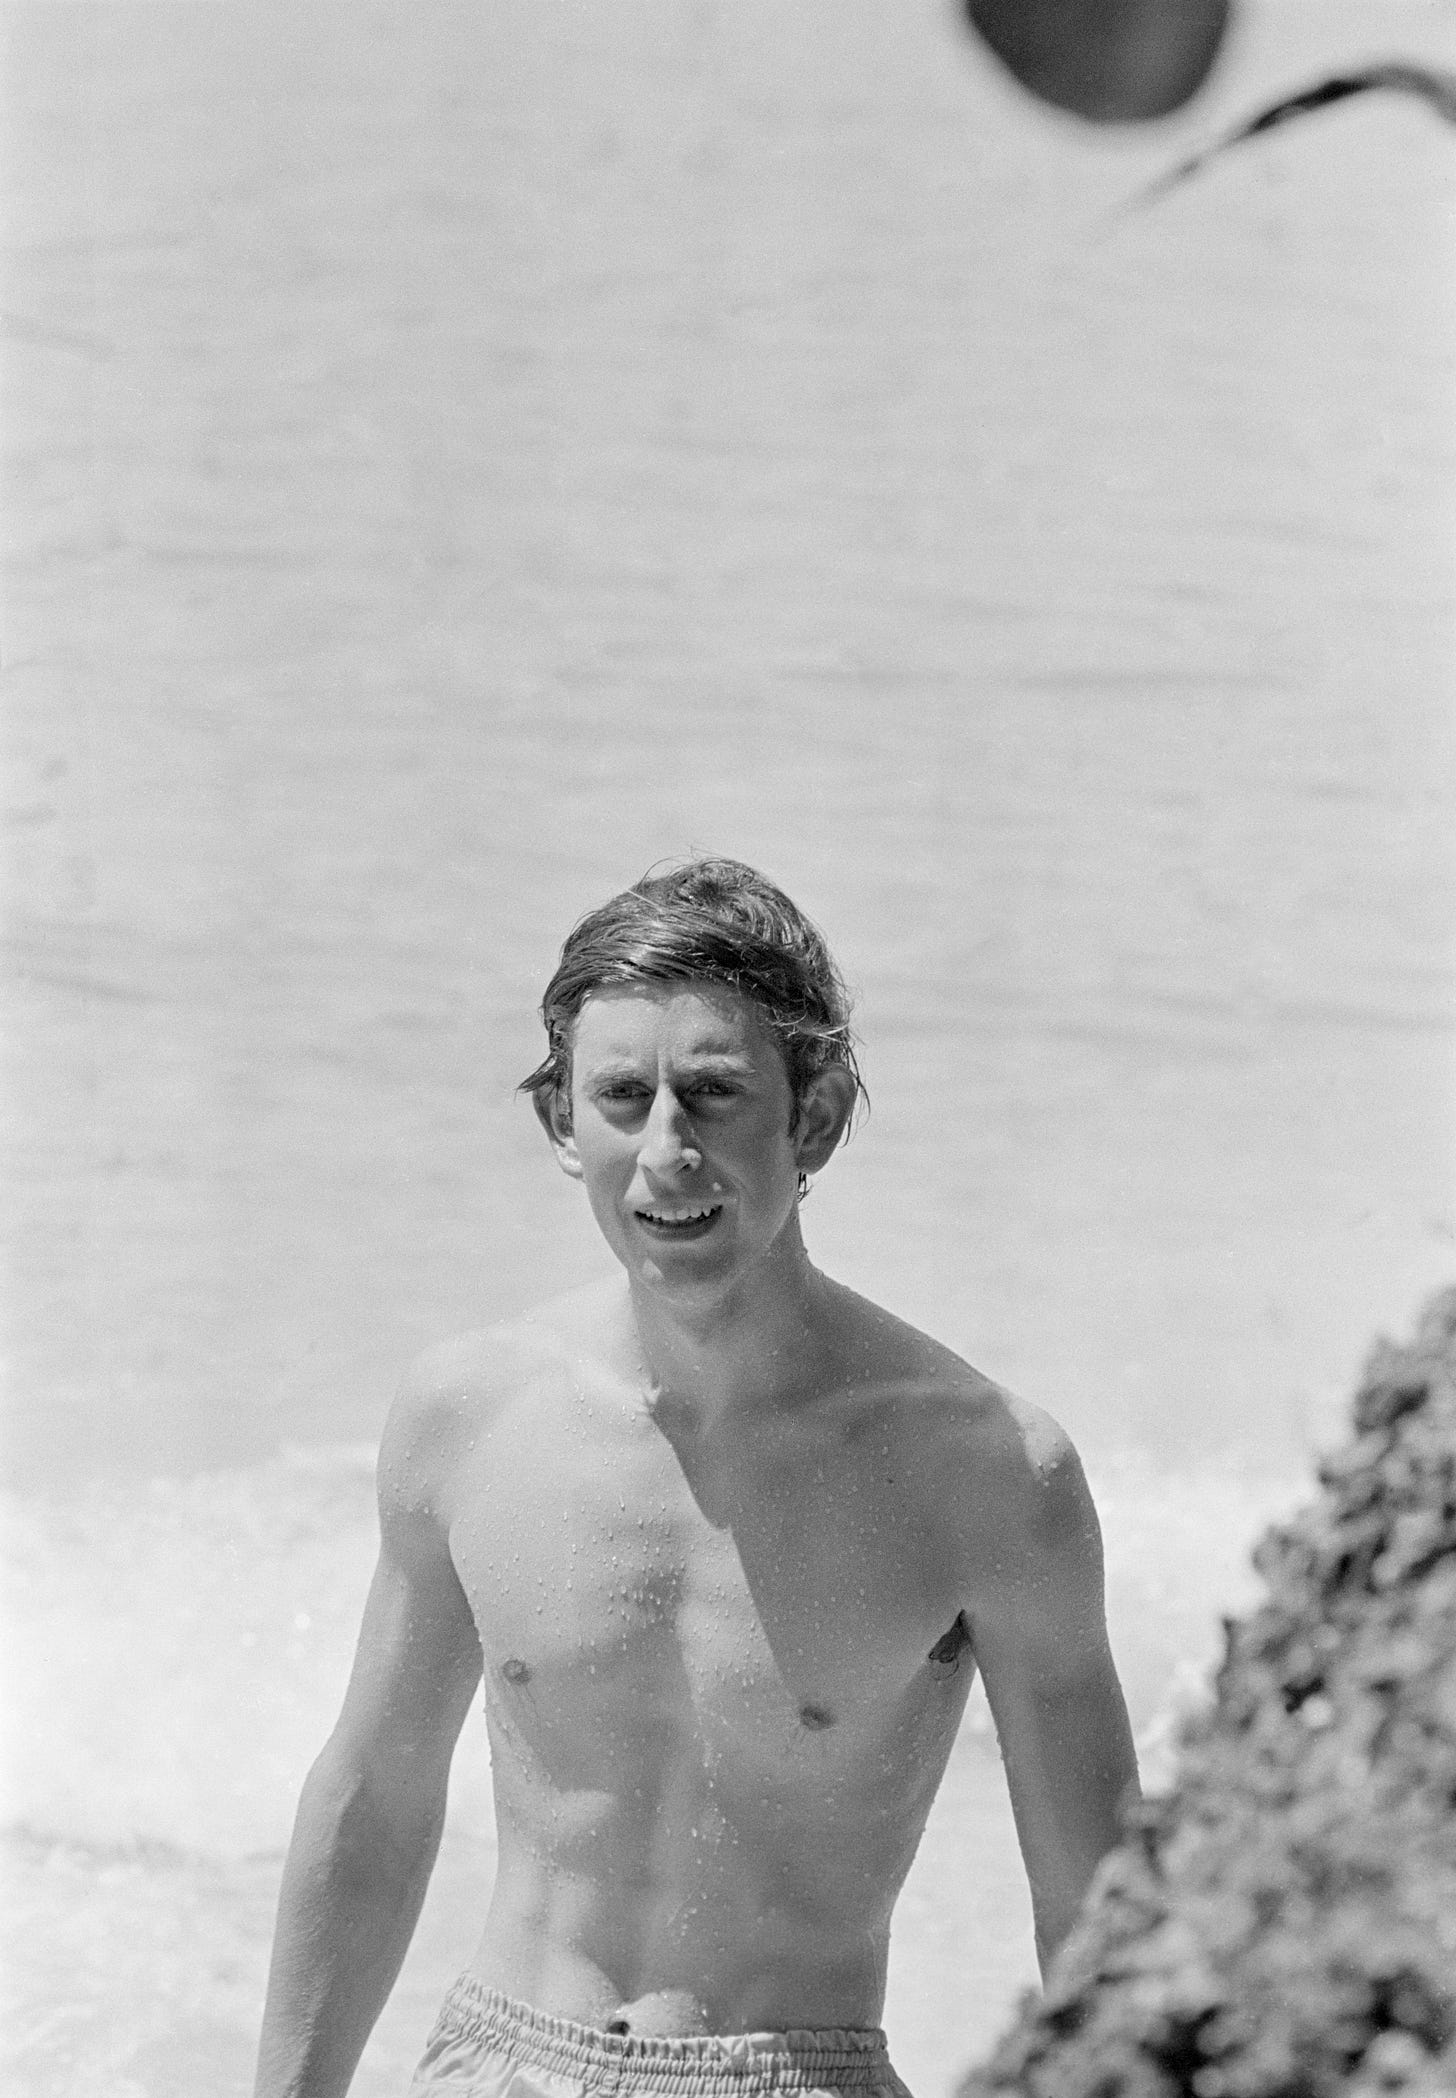 king charles aged 21 on holiday in barbados